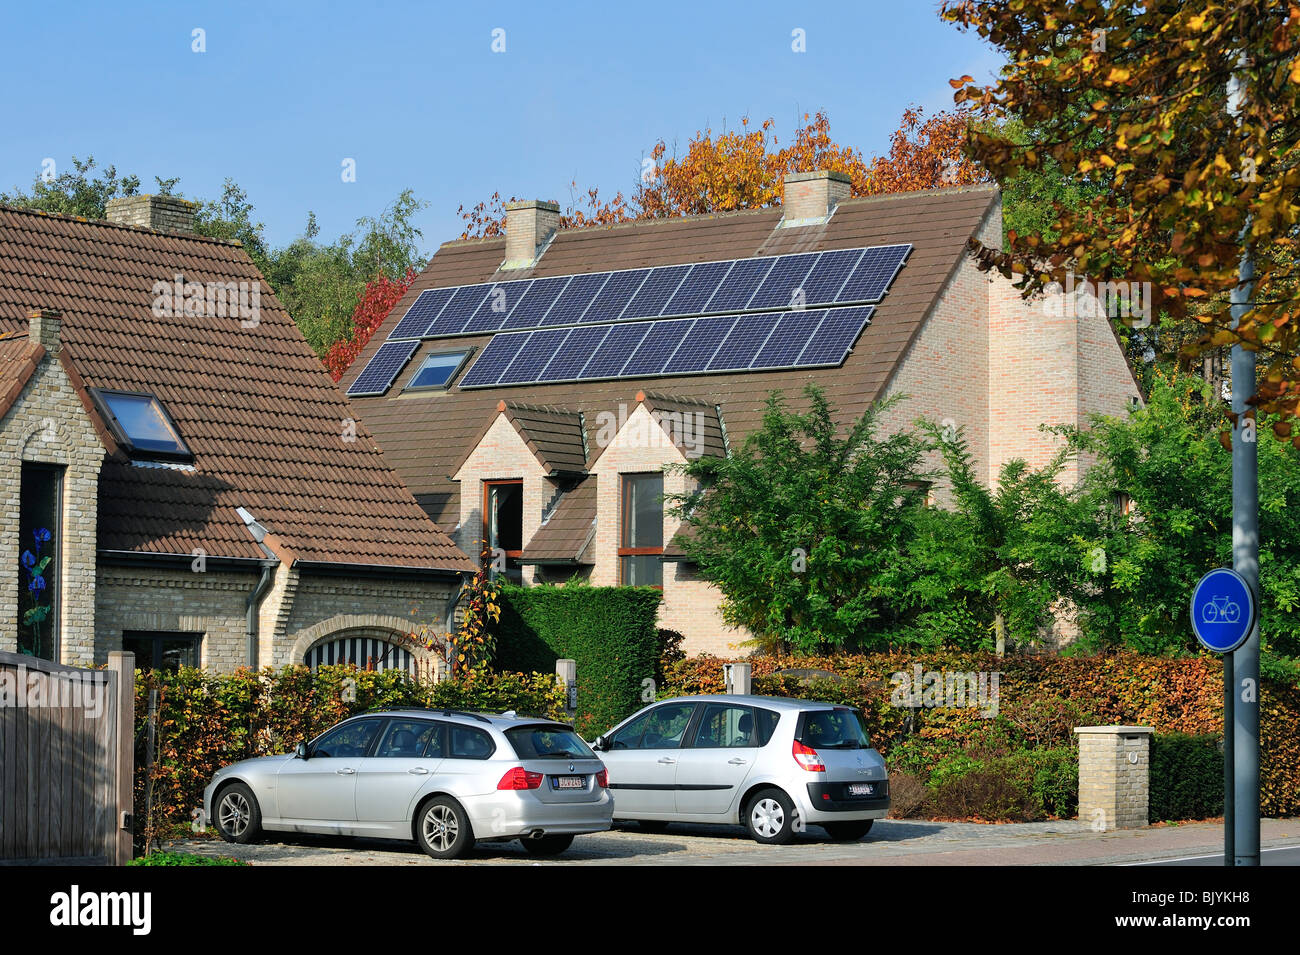 Photovoltaic solar panels on roof of house Stock Photo